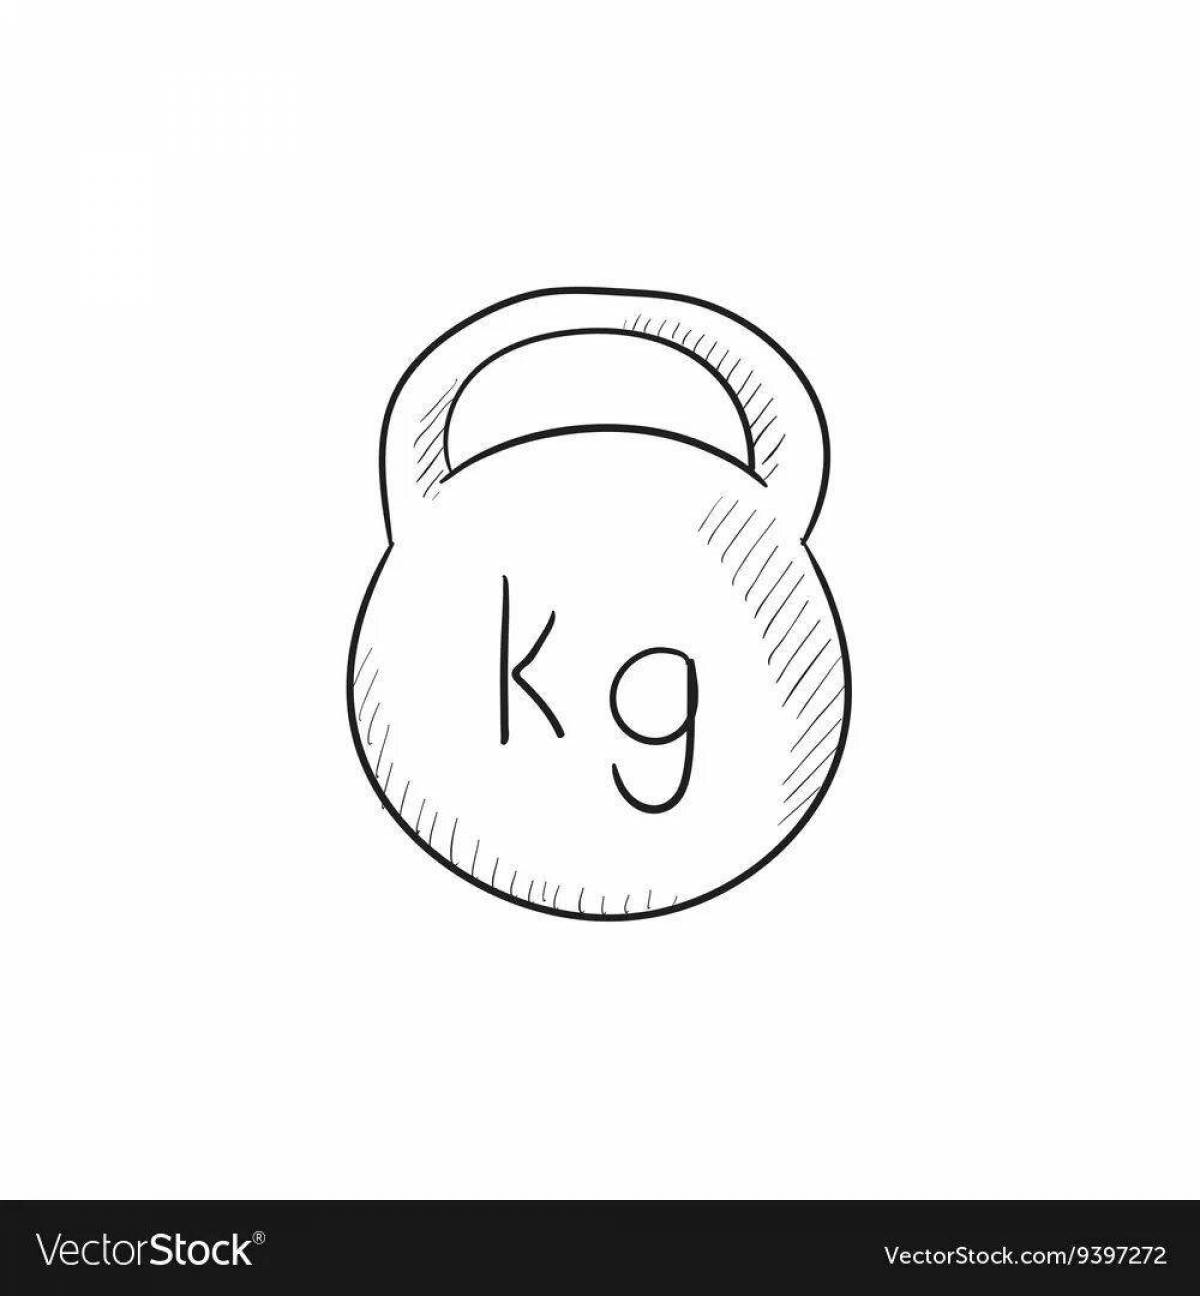 Coloring book with kettlebells for kids